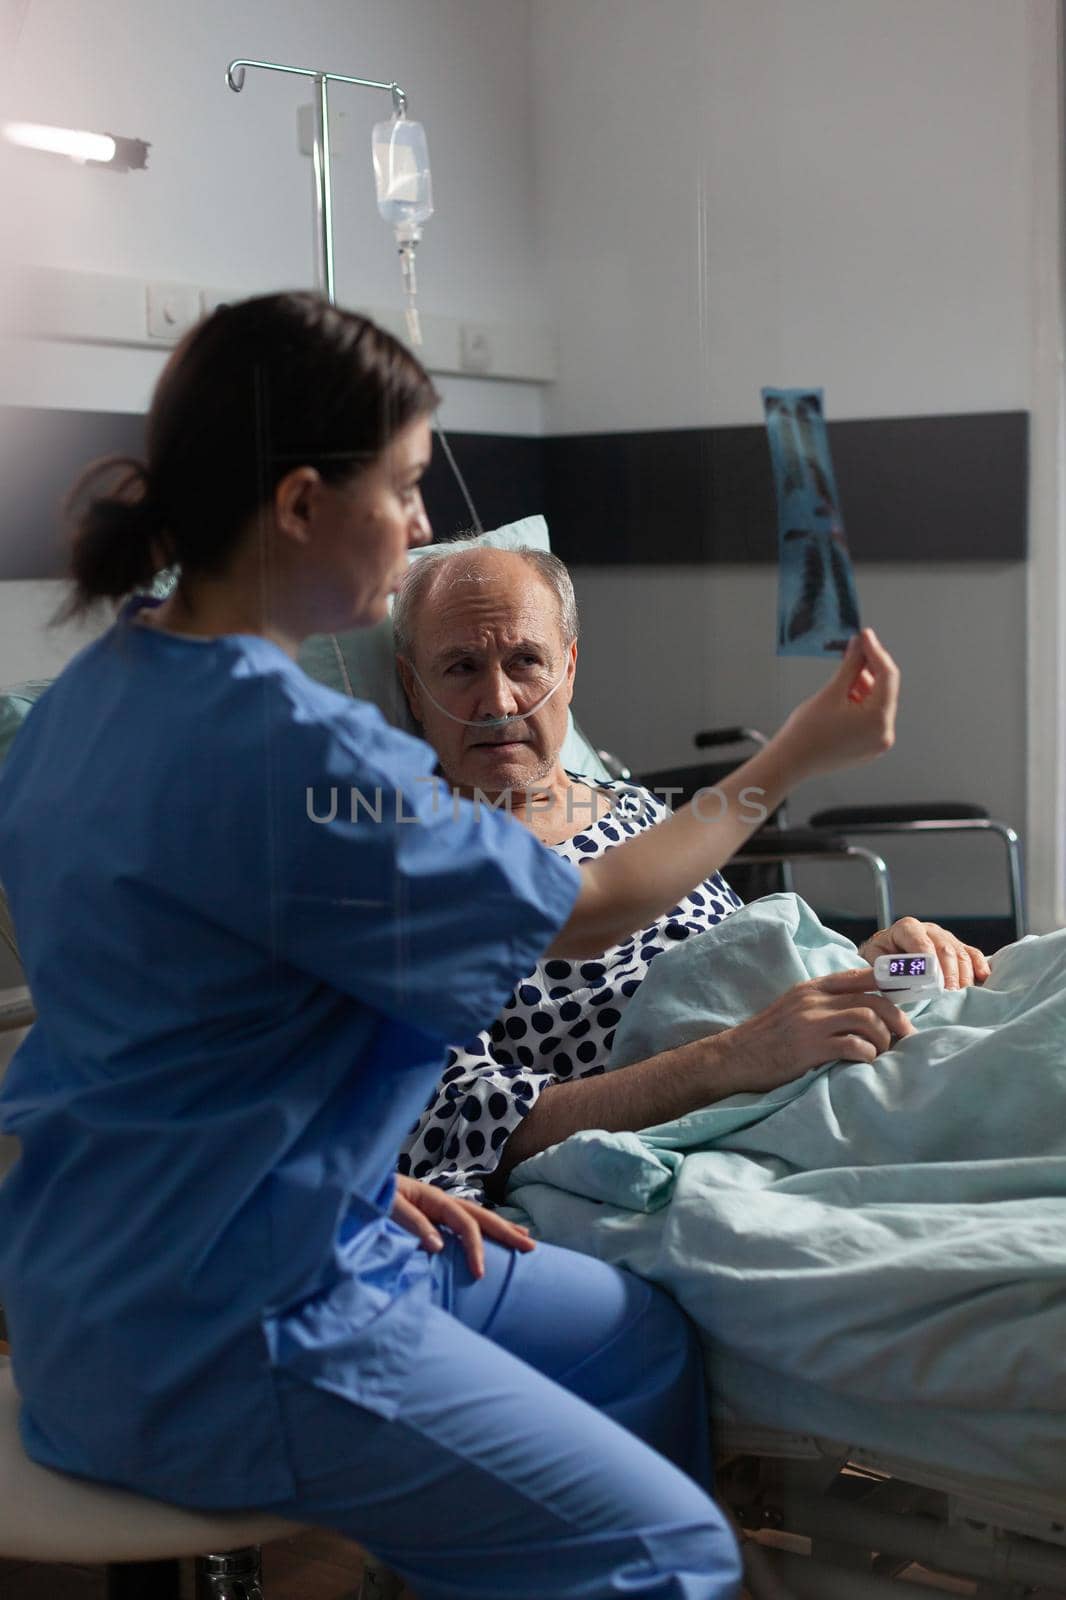 Medical nurse analyzing senior patient x-ray in hospital room by DCStudio